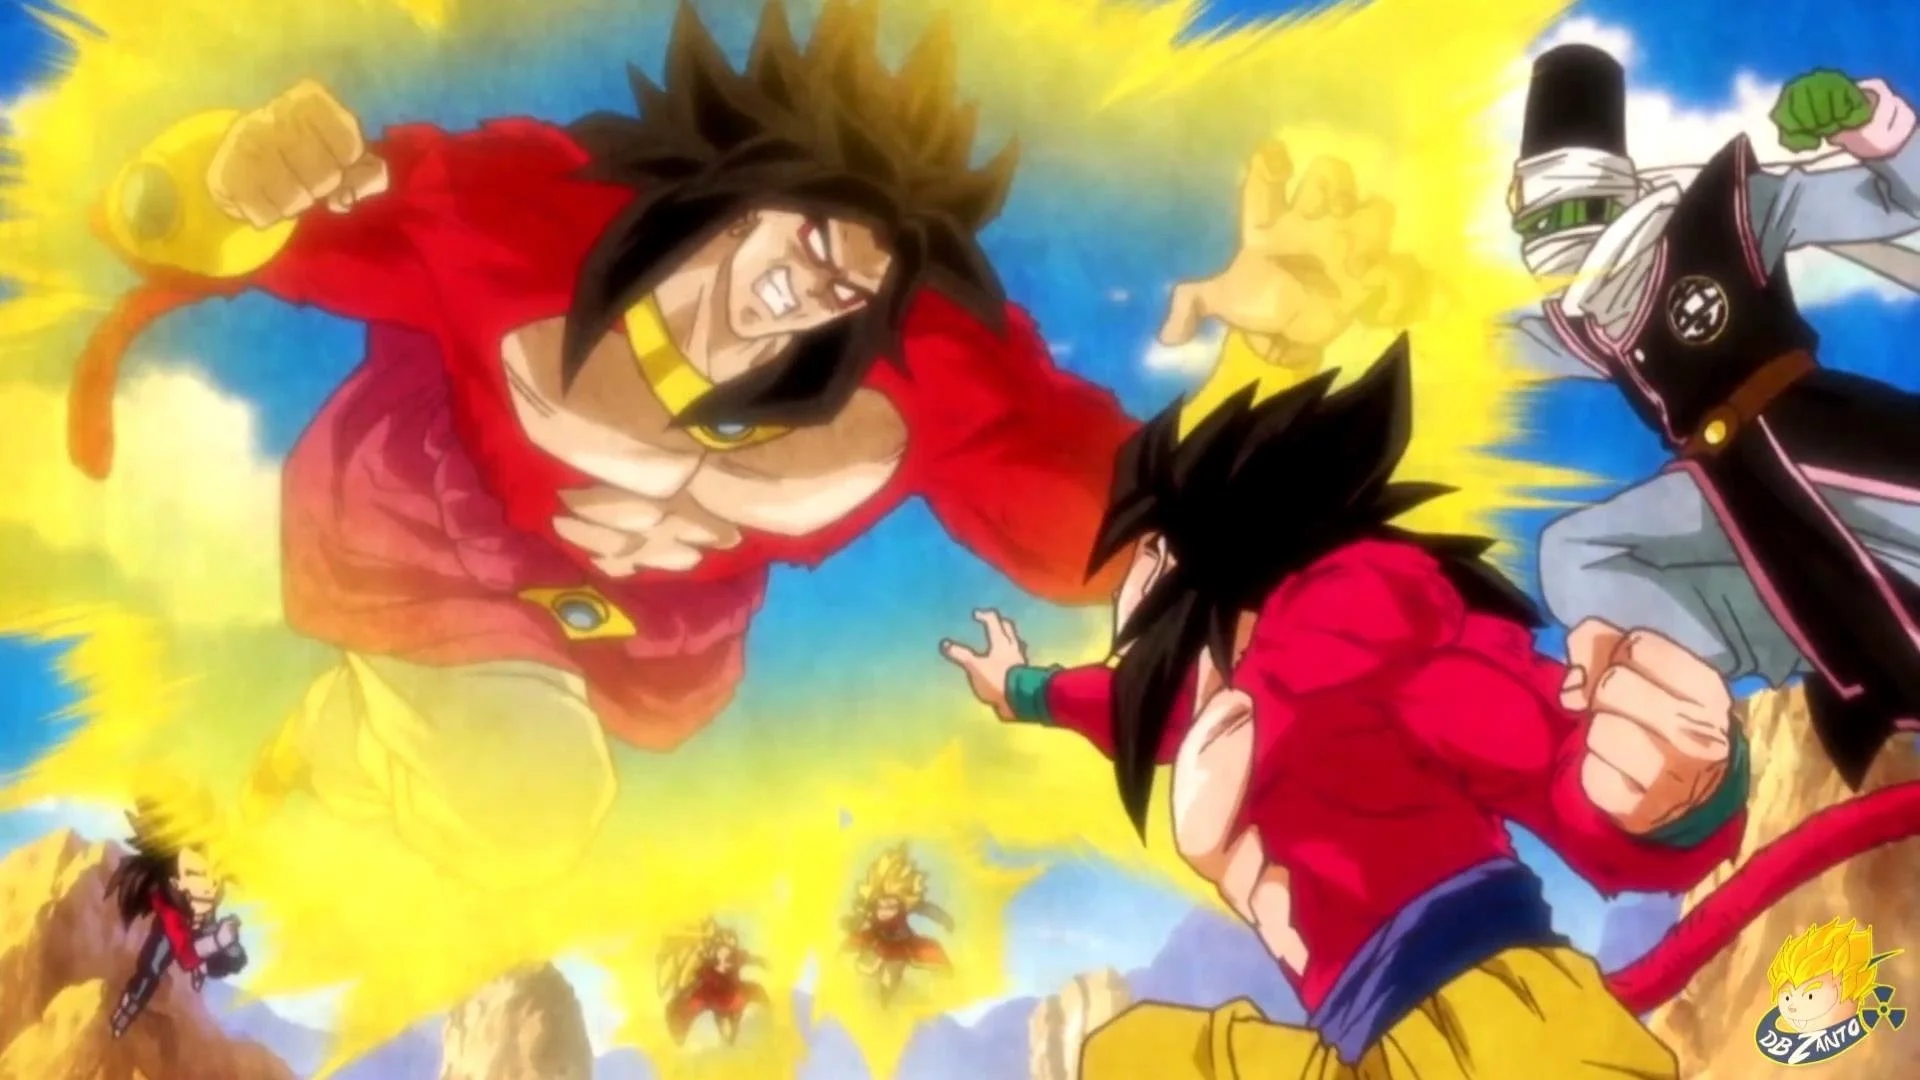 Broly Super Saiyin 4 – Entering the fight.